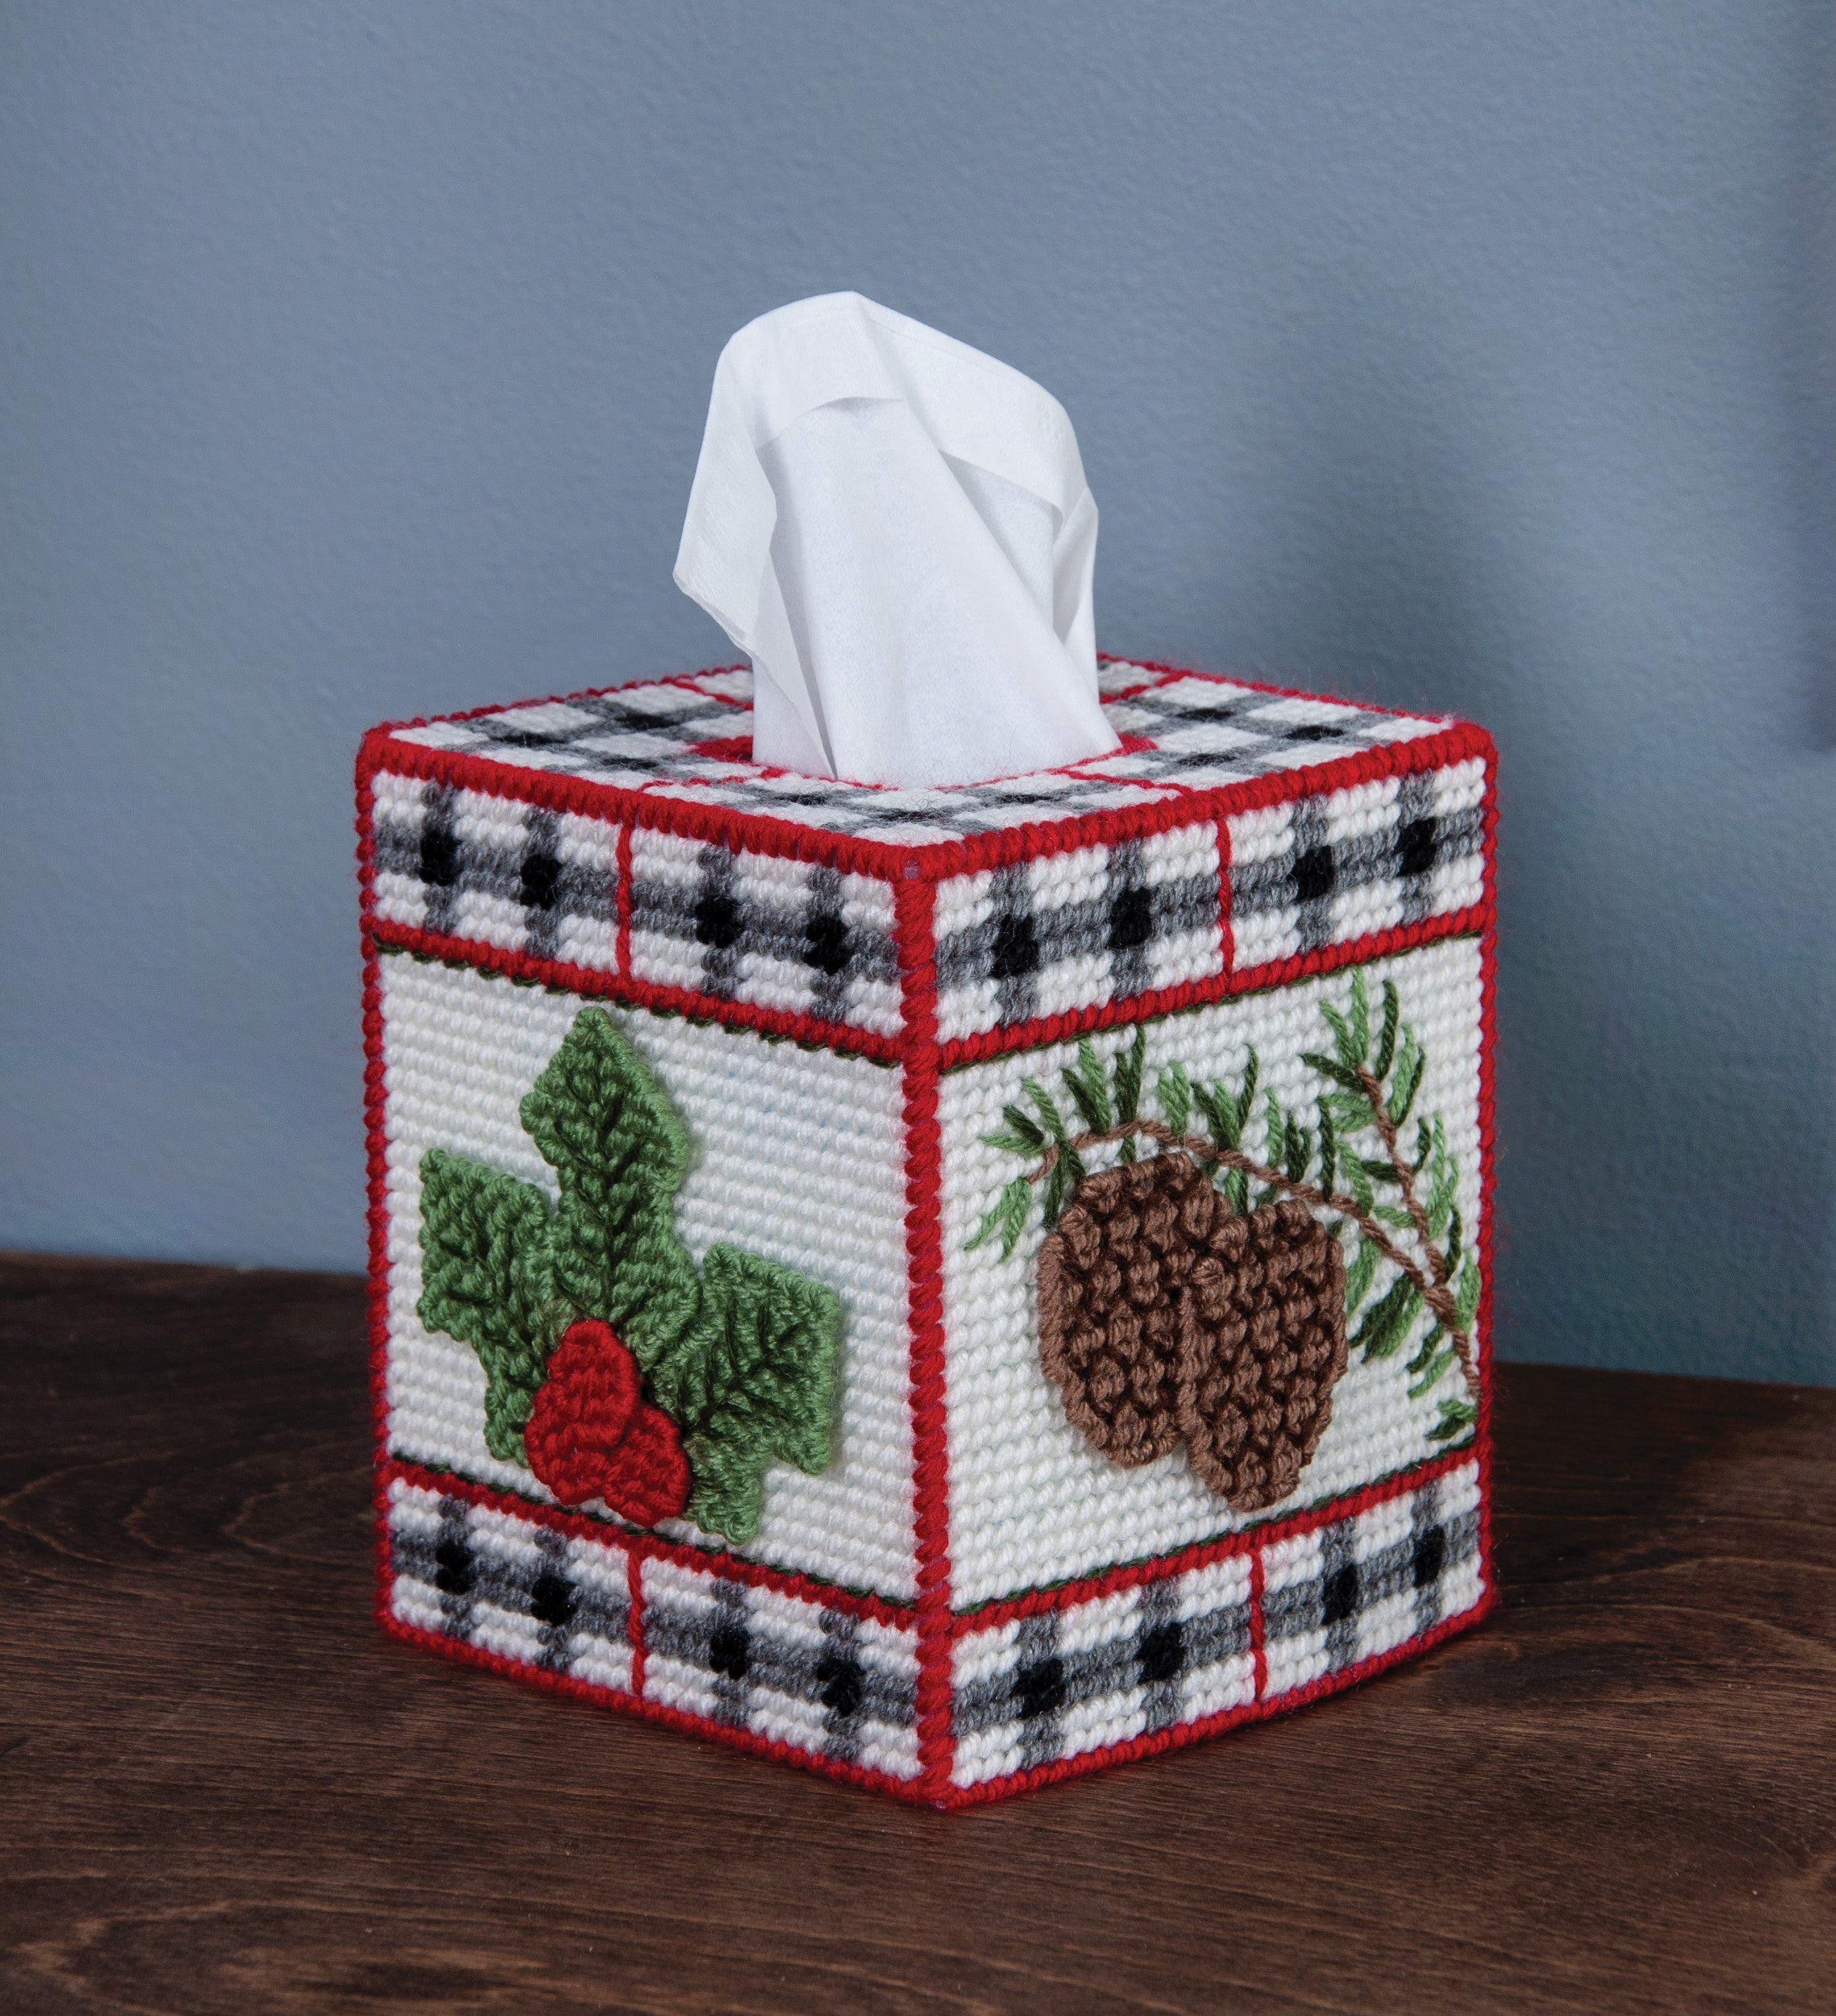 Plastic Canvas Tissue Box Cover Kit. This Design features a red, black and white plaid with winter leaves and pinecones. 